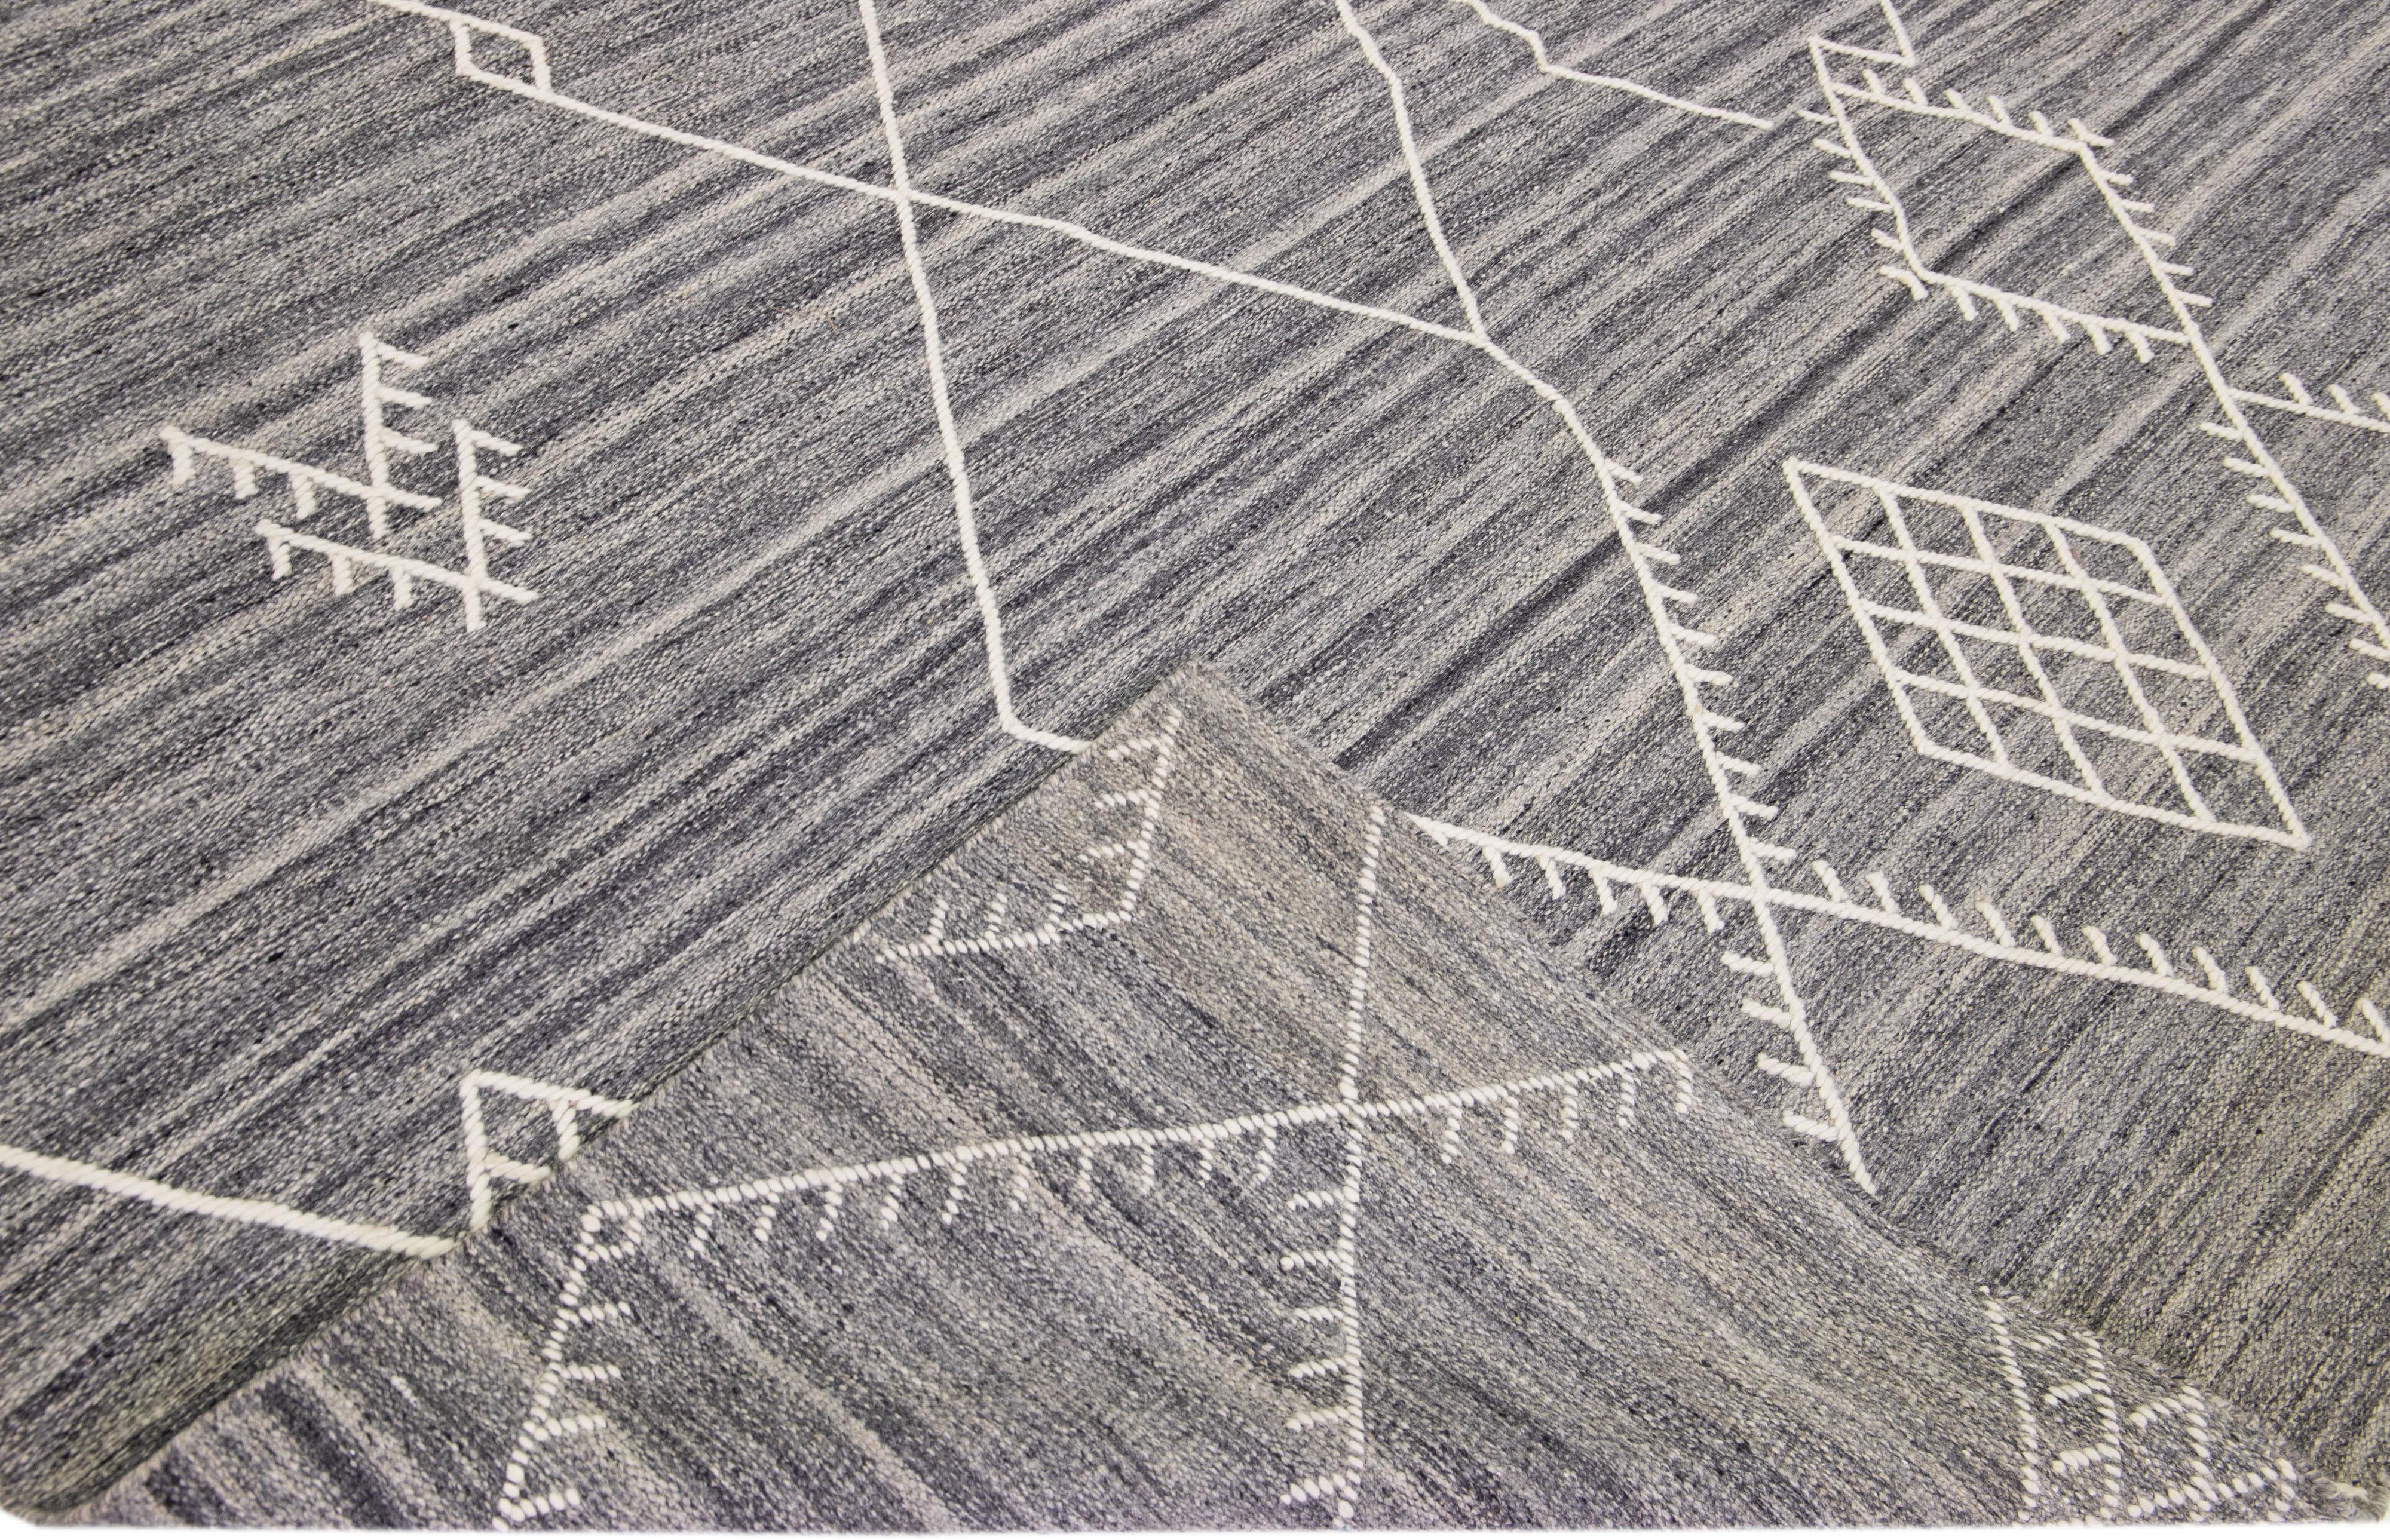 Beautiful kilim handmade wool rug with a gray field. This custom modern flatweave rug of our Nantucket collection has white accents and a gorgeous, all-over geometric coastal design.

This rug measures: 10'4